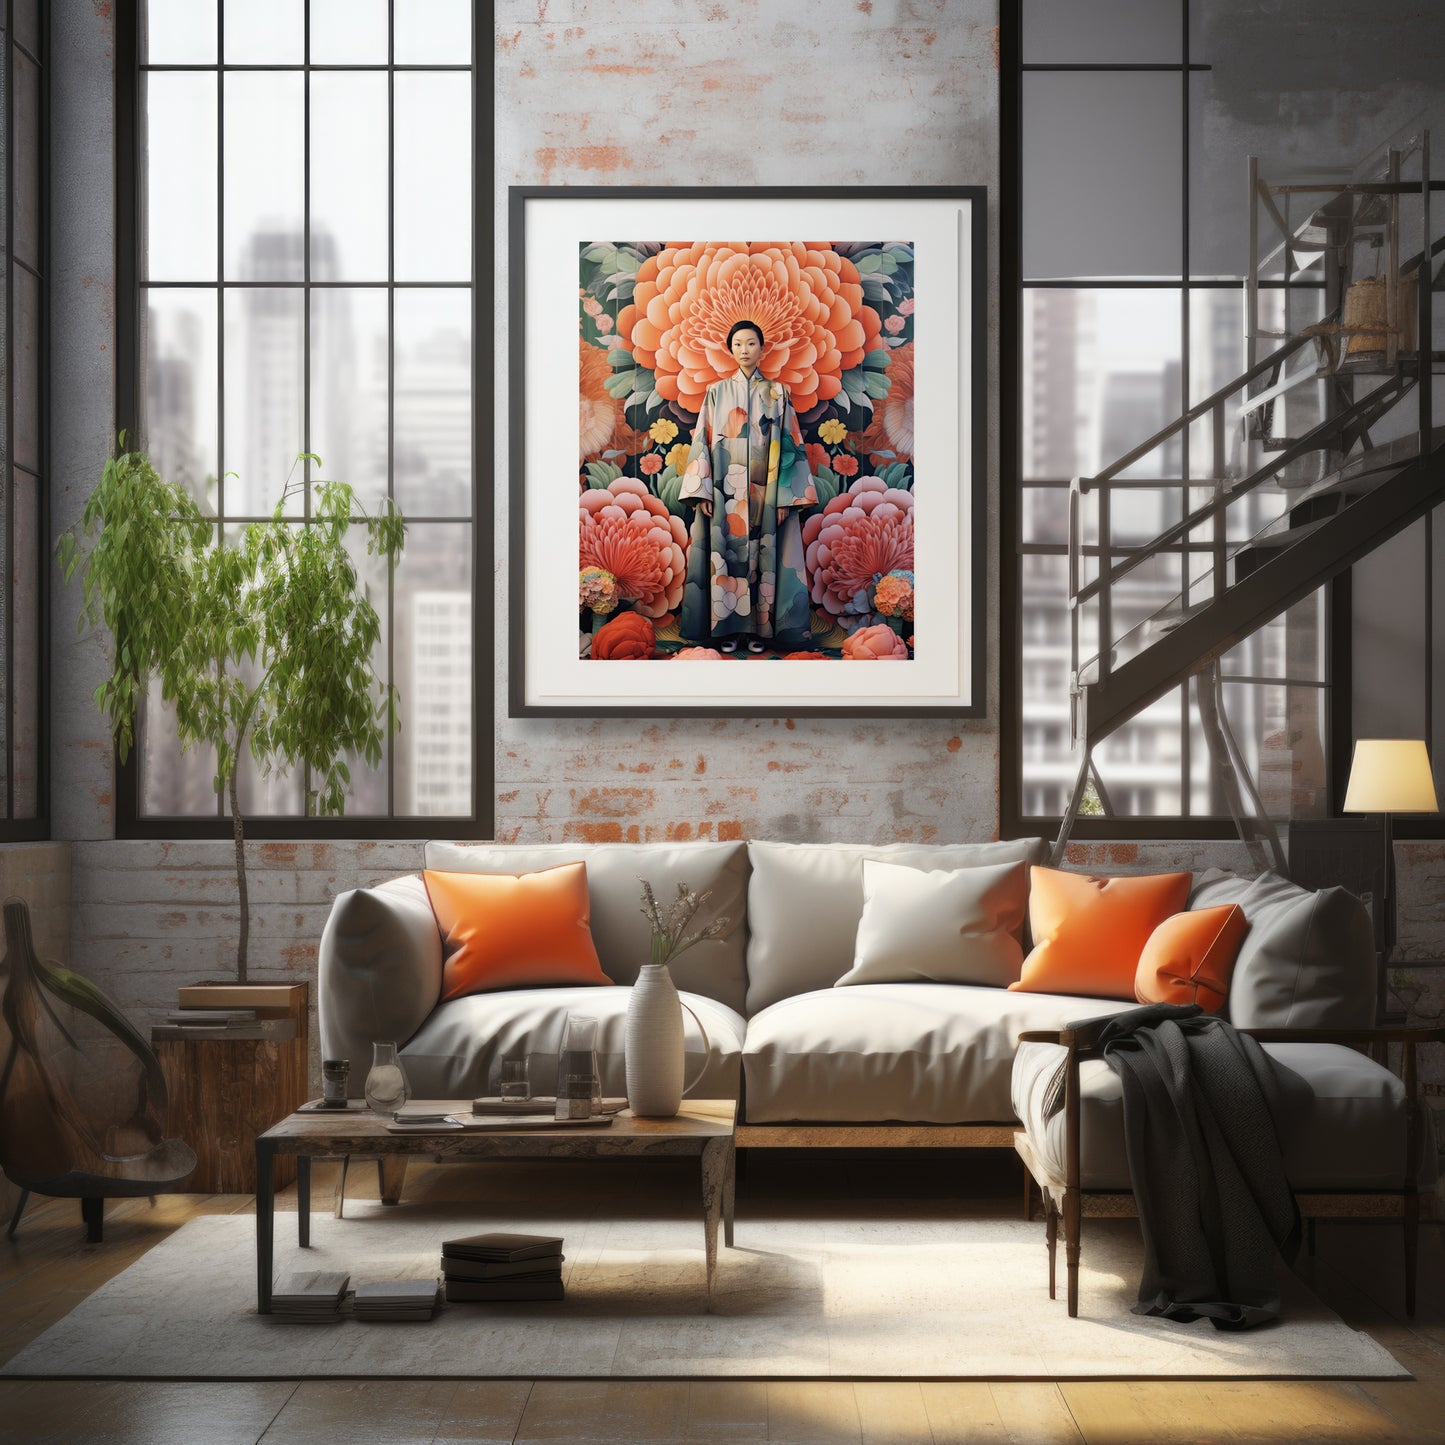 Artwork print featuring a woman in a traditional floral-patterned kimono, set against a background of large, richly colored flowers in shades of orange and pink. This fine art print is a captivating visual fable.